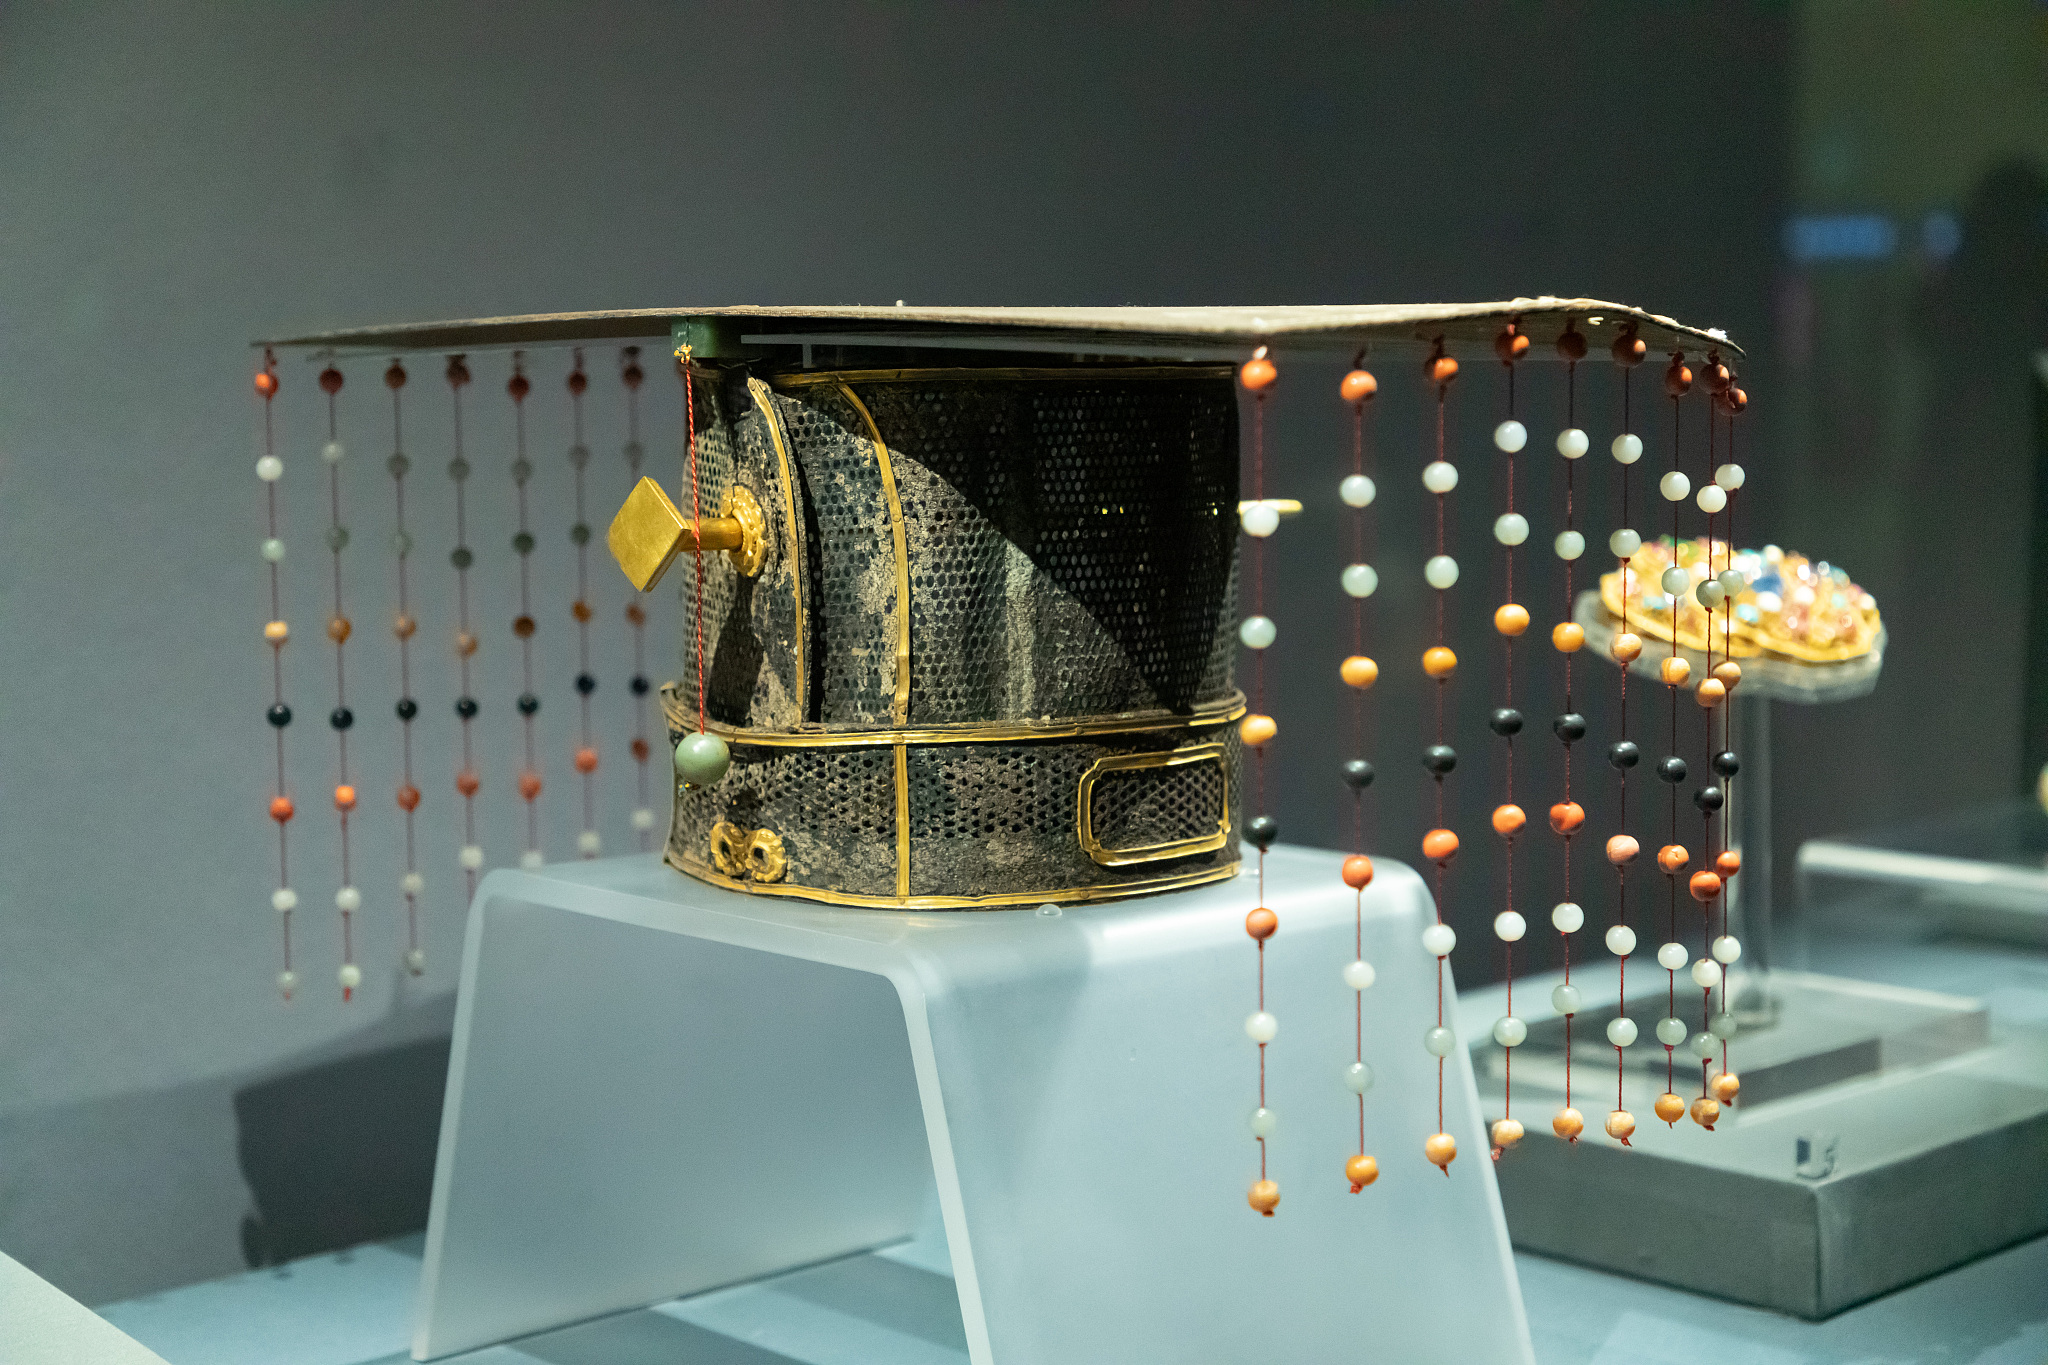 A nine-stringed crown unearthed from the tomb of a Ming Dynasty (1368-1644) prince is on display at an exhibition showcasing exquisite cultural relics from Shandong Province. /CFP